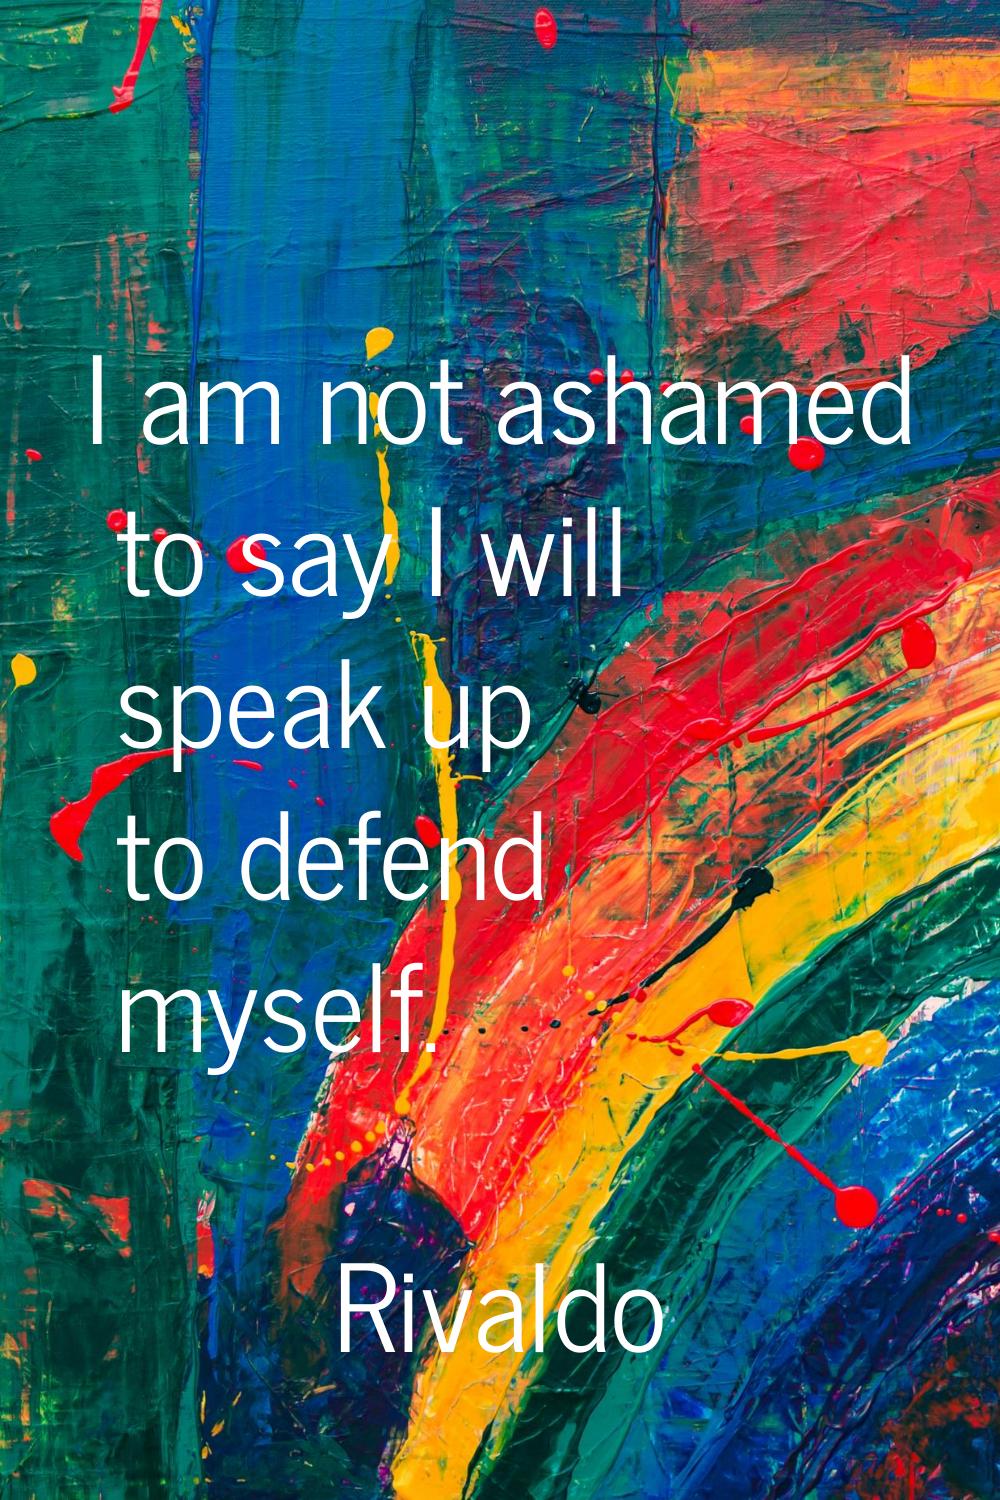 I am not ashamed to say I will speak up to defend myself.